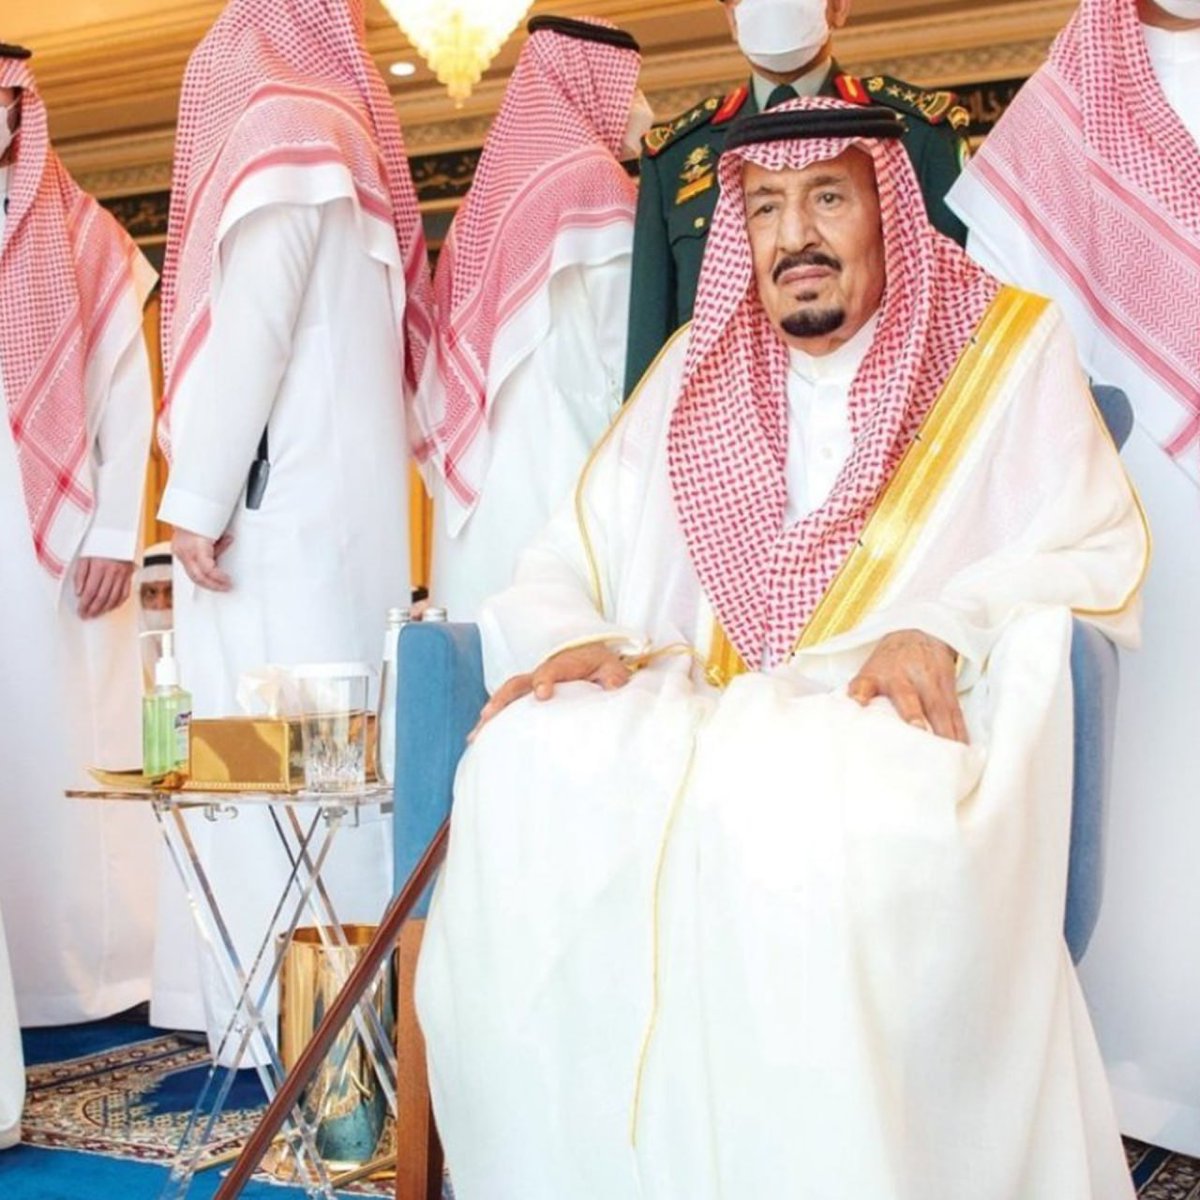 🔴 The King Signs Off on Executions and Withholds Pardons Only the king in #SaudiArabia has the right to pardon in public rights cases. According to the ESOHR monitoring, the royal pardon issued annually never included detainees facing the death penalty. cutt.ly/4etRJnwM